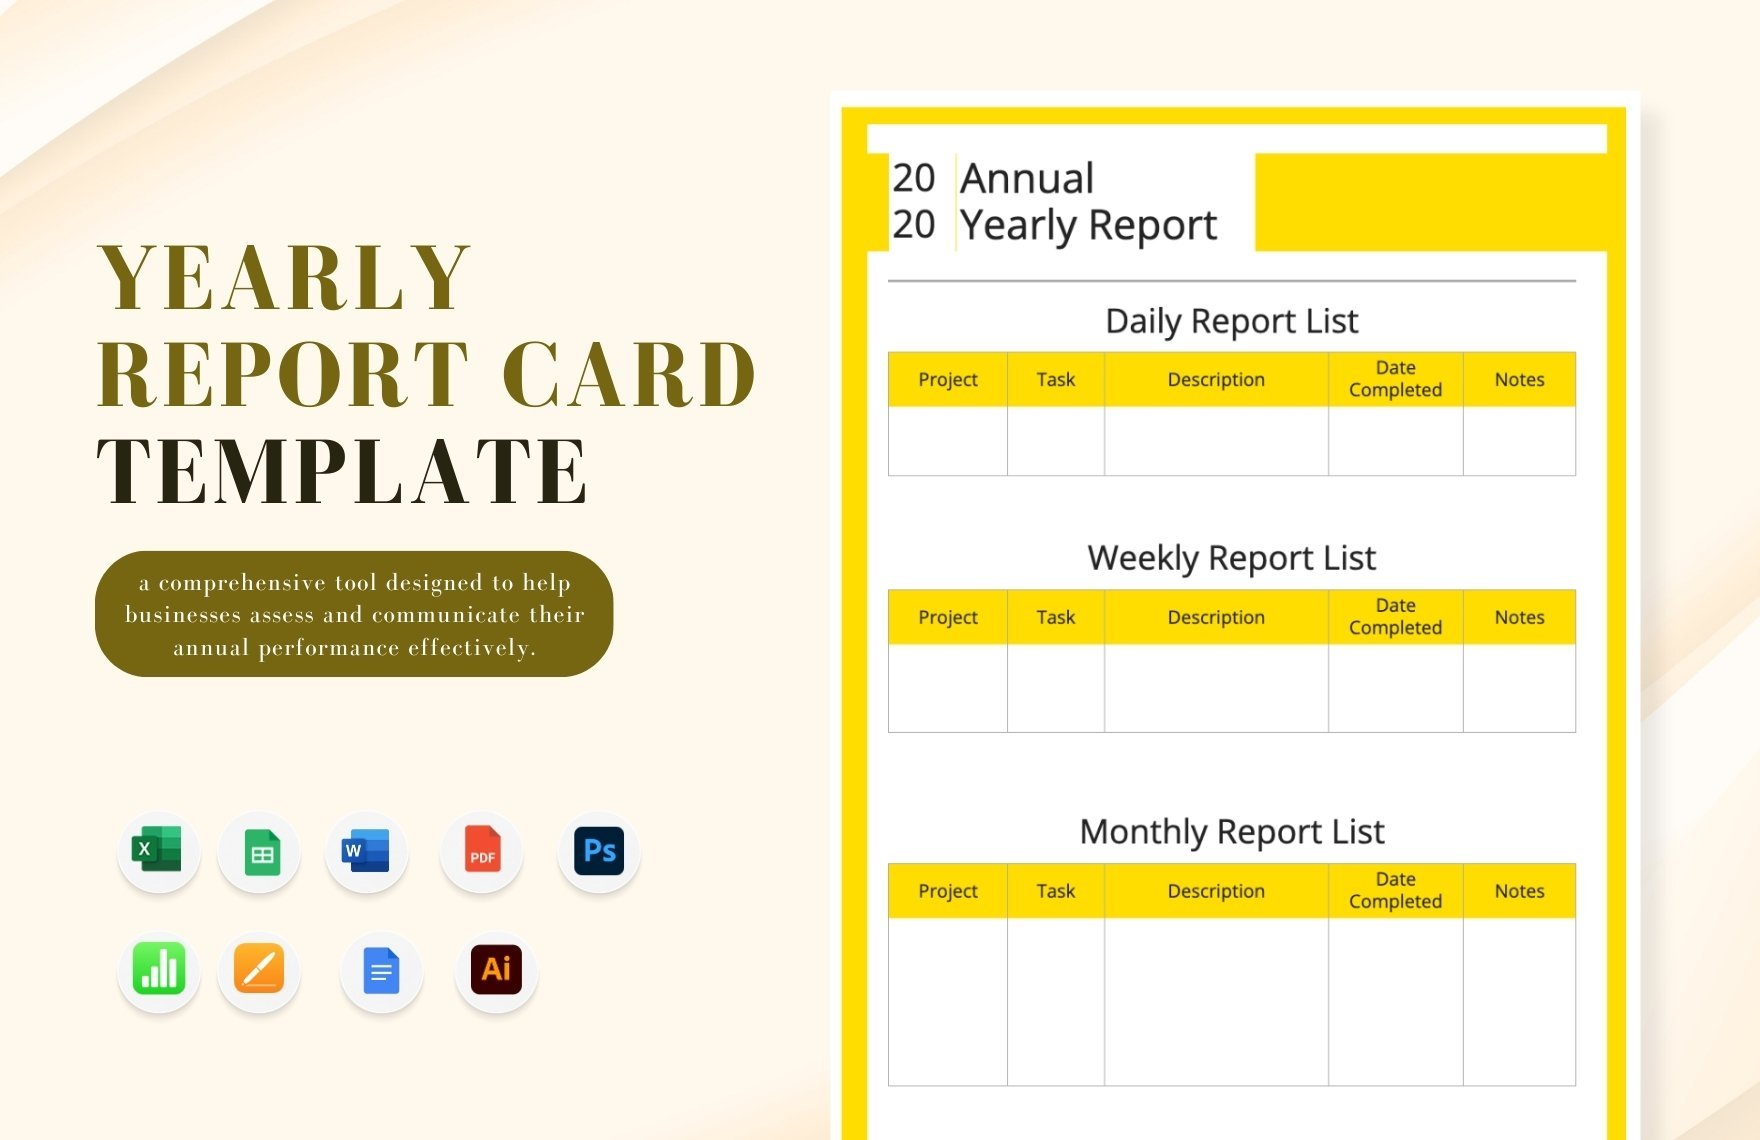 Yearly Report Card Template